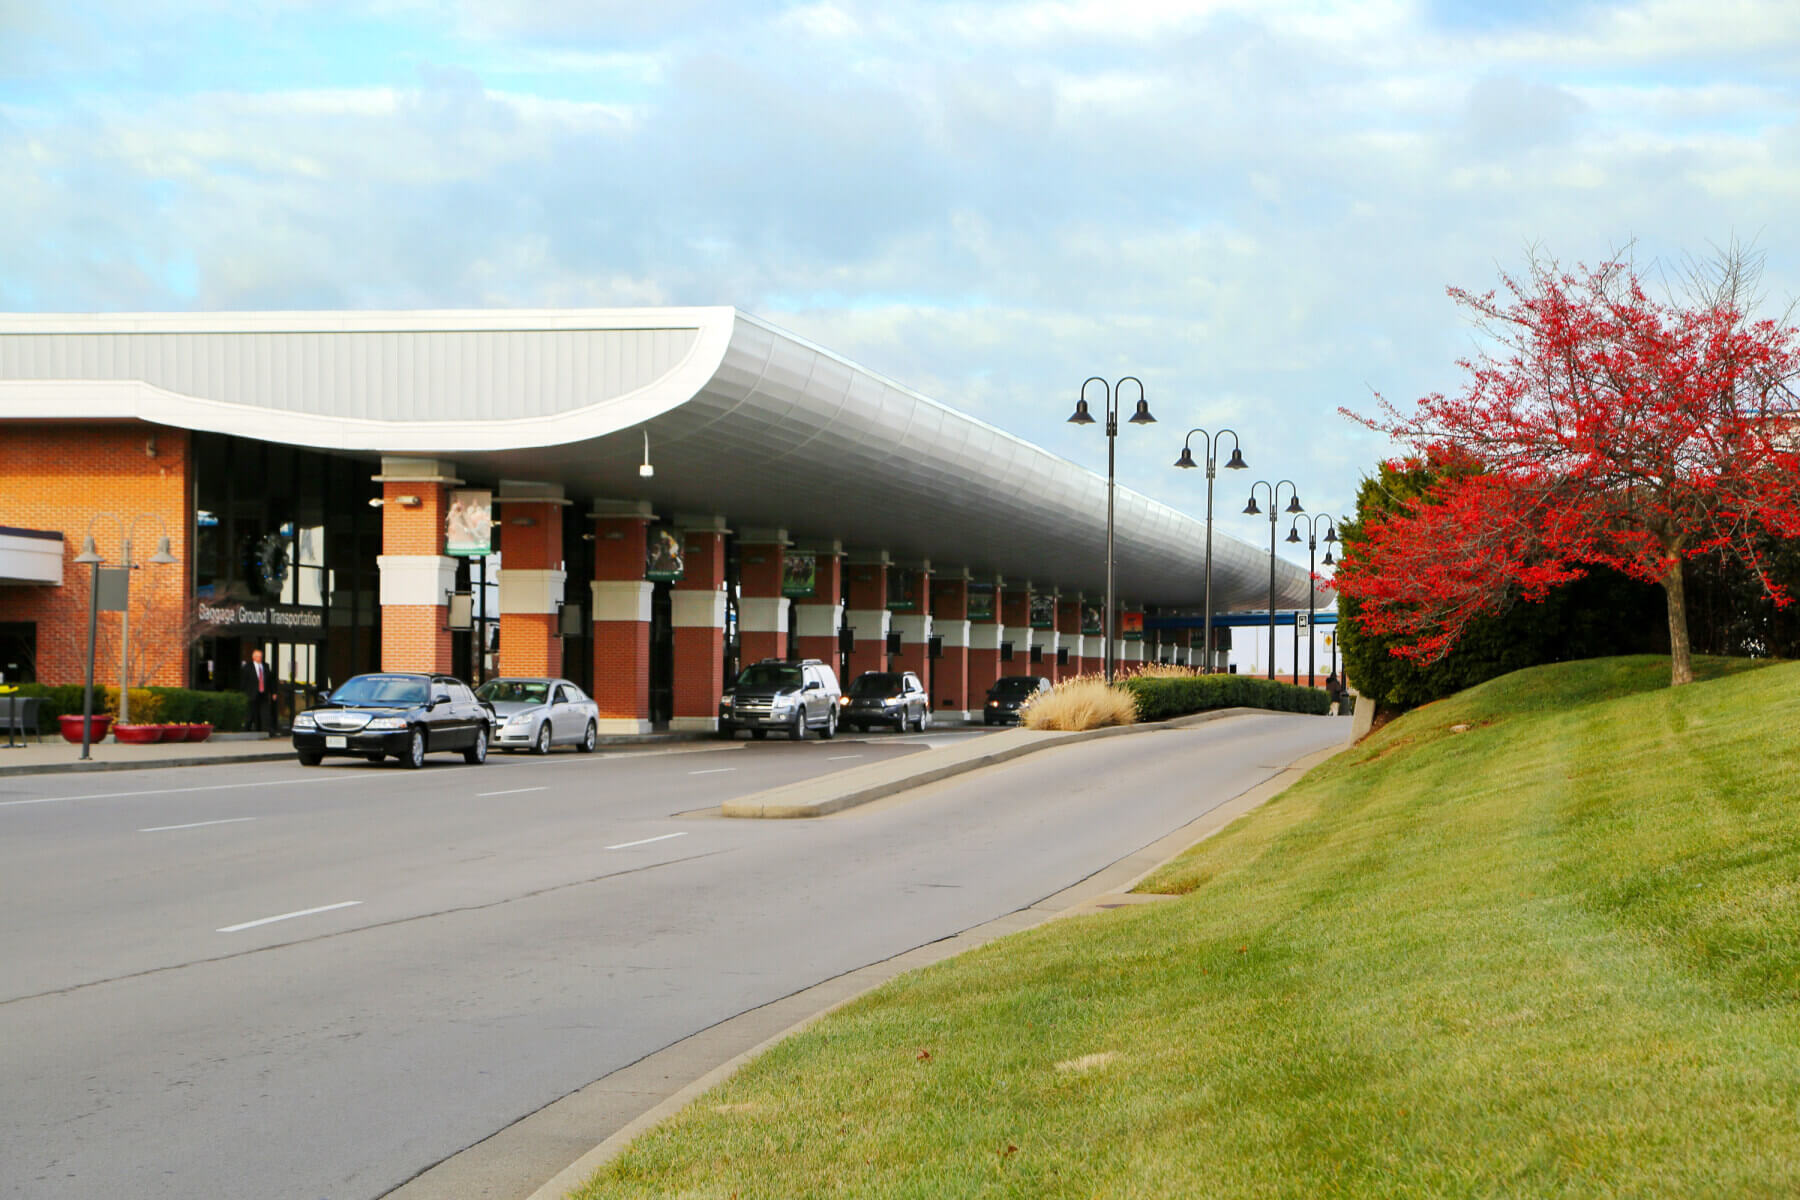 cars parked under the canopy over the curbside outside Lexington, Kentucky’s Blue Grass Airport